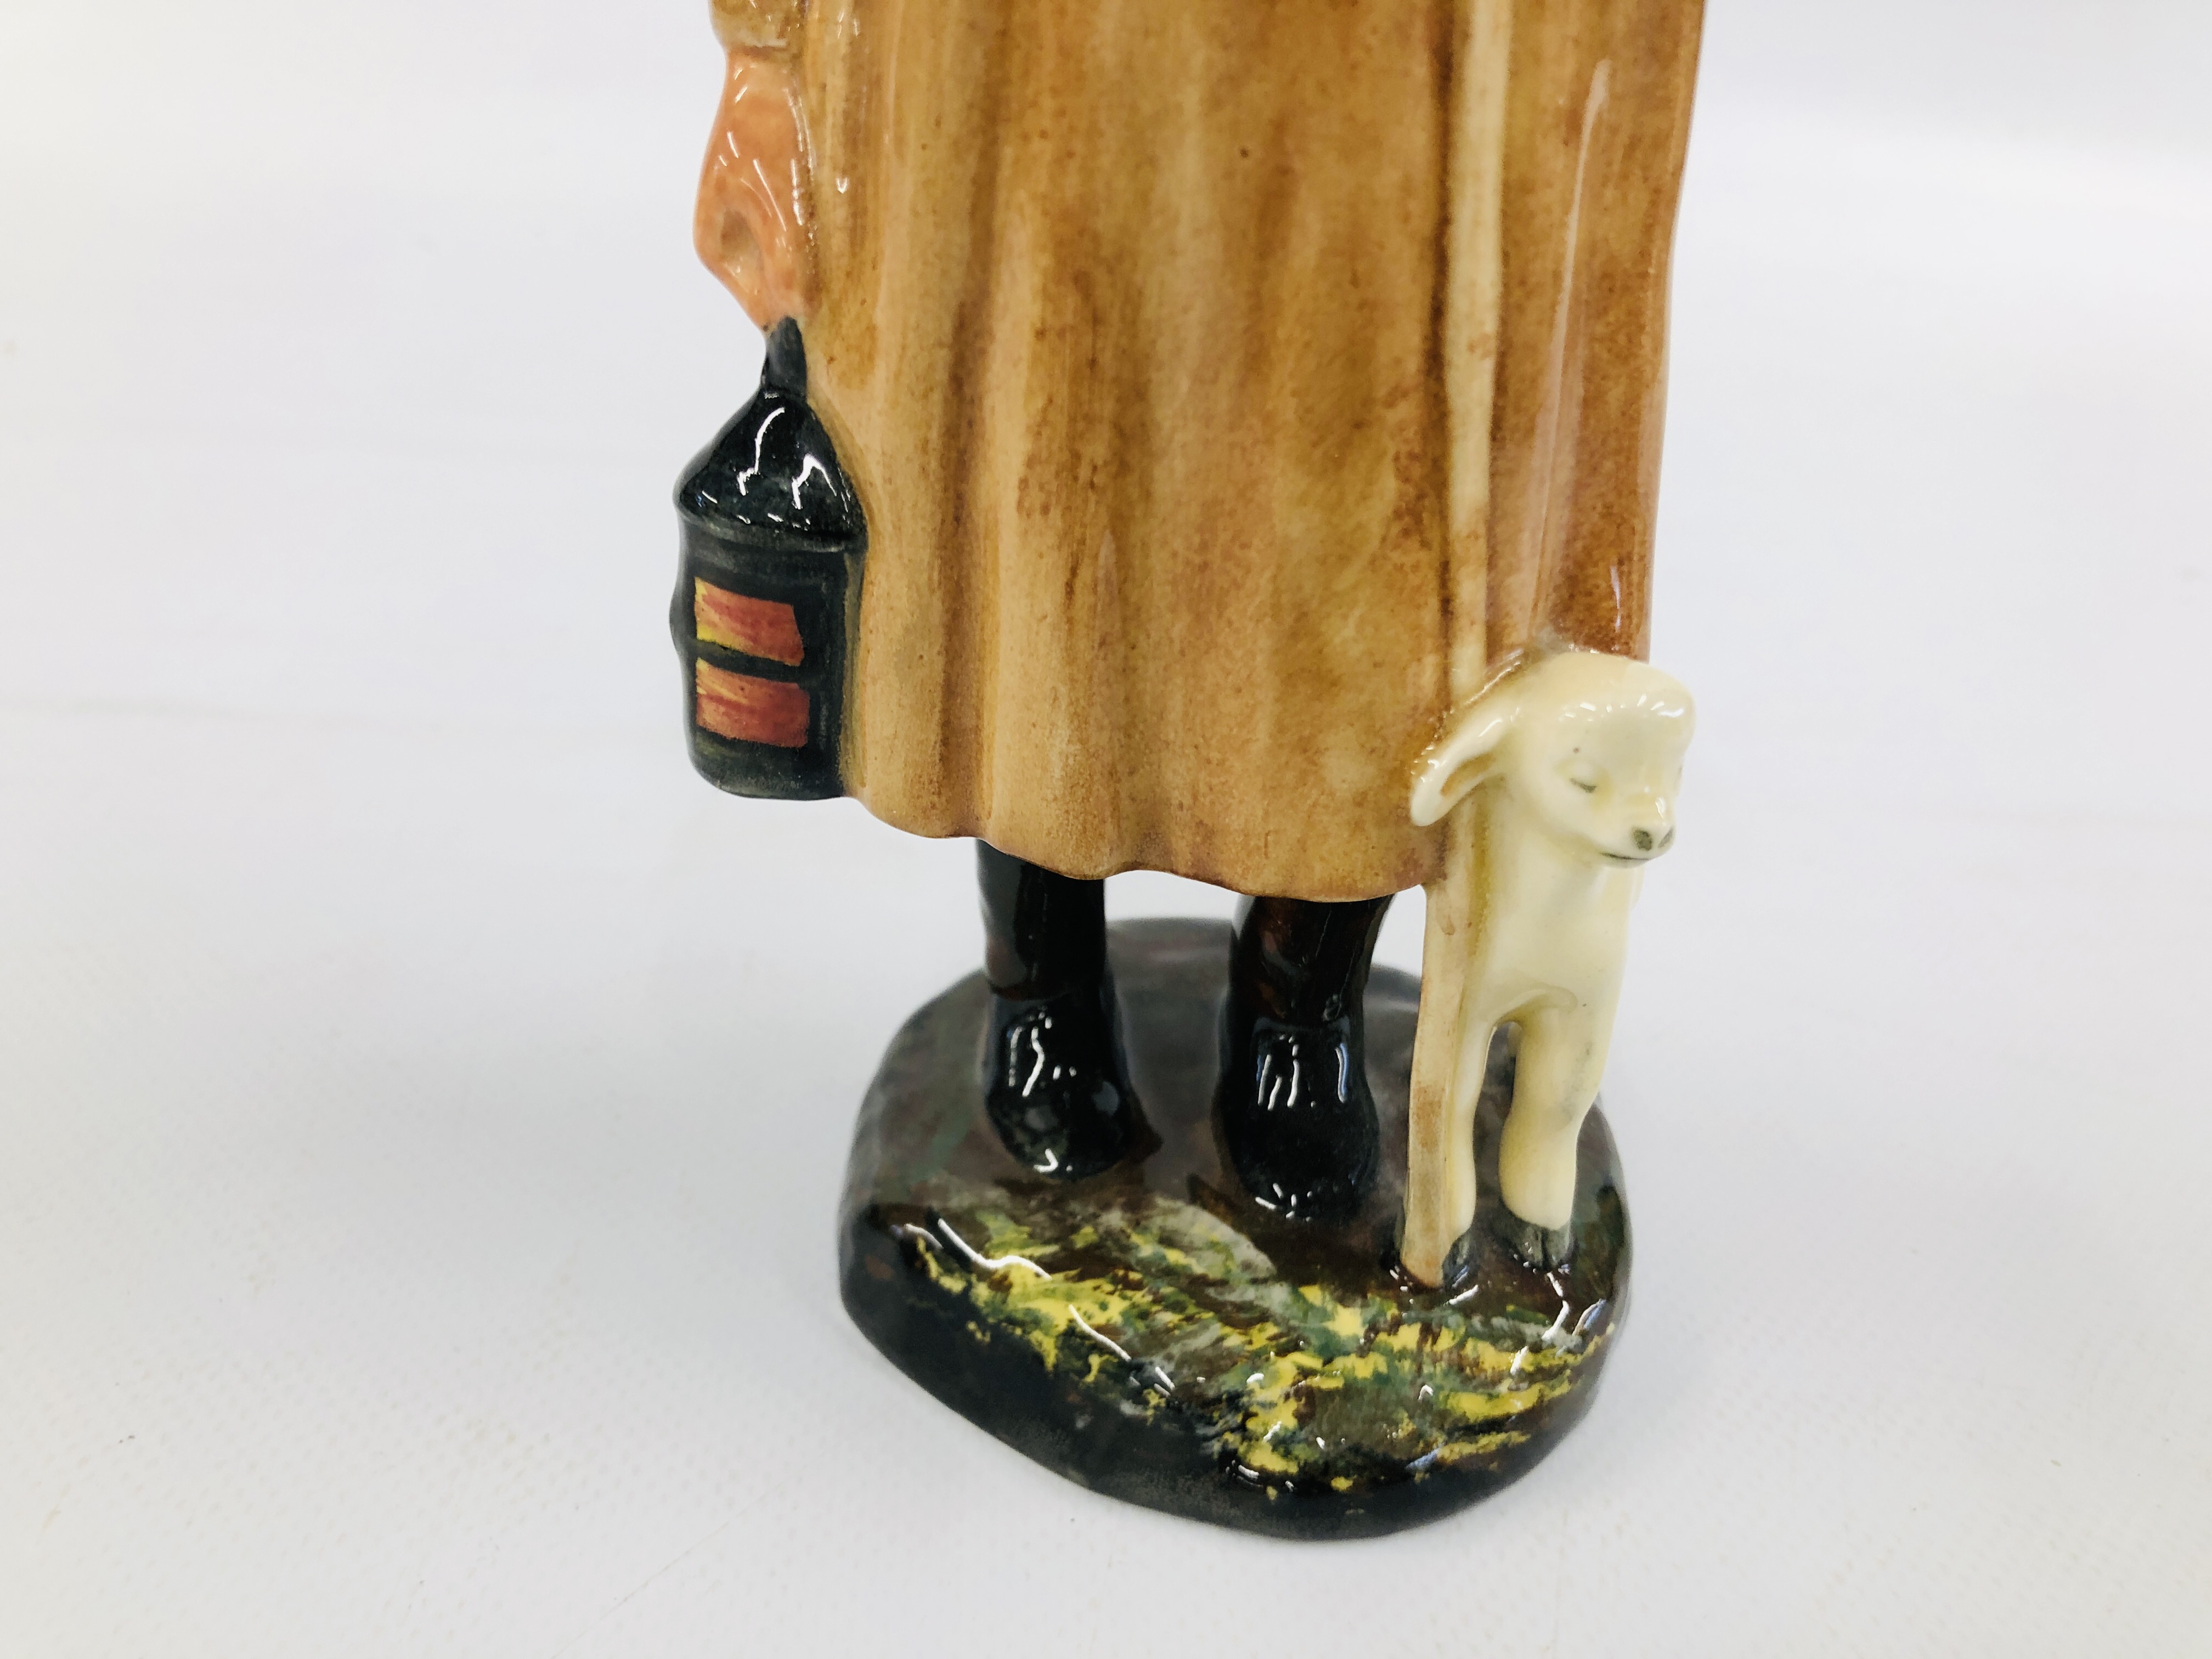 ROYAL DOULTON FIGURE OF "THE SHEPHERD" H.N. 1975 R NO. 842485 22CM H. - Image 4 of 7